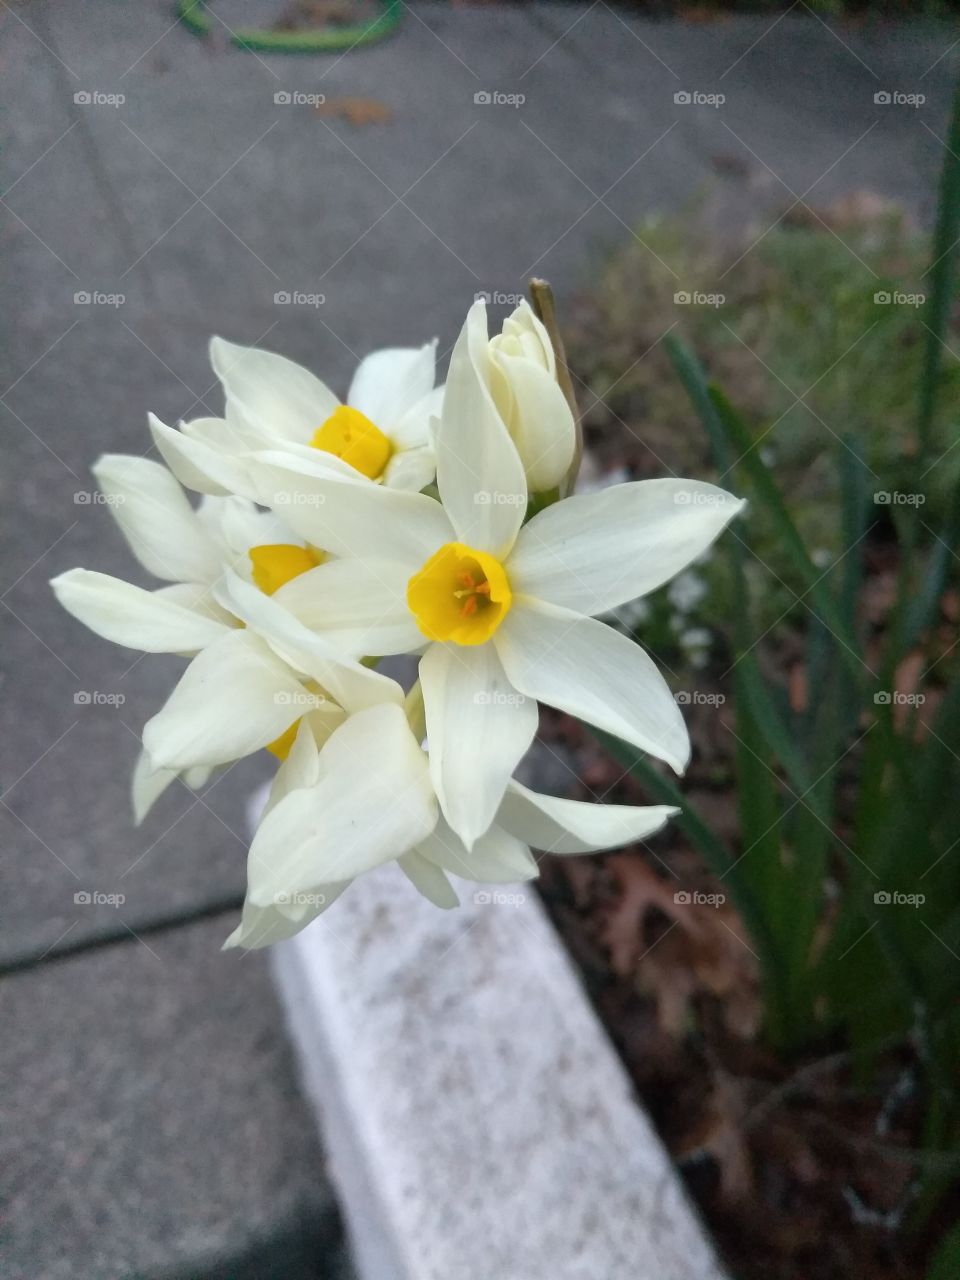 Baby Daffodils. Flowers.. just a piece of nature's beauty. Enjoy the little things.